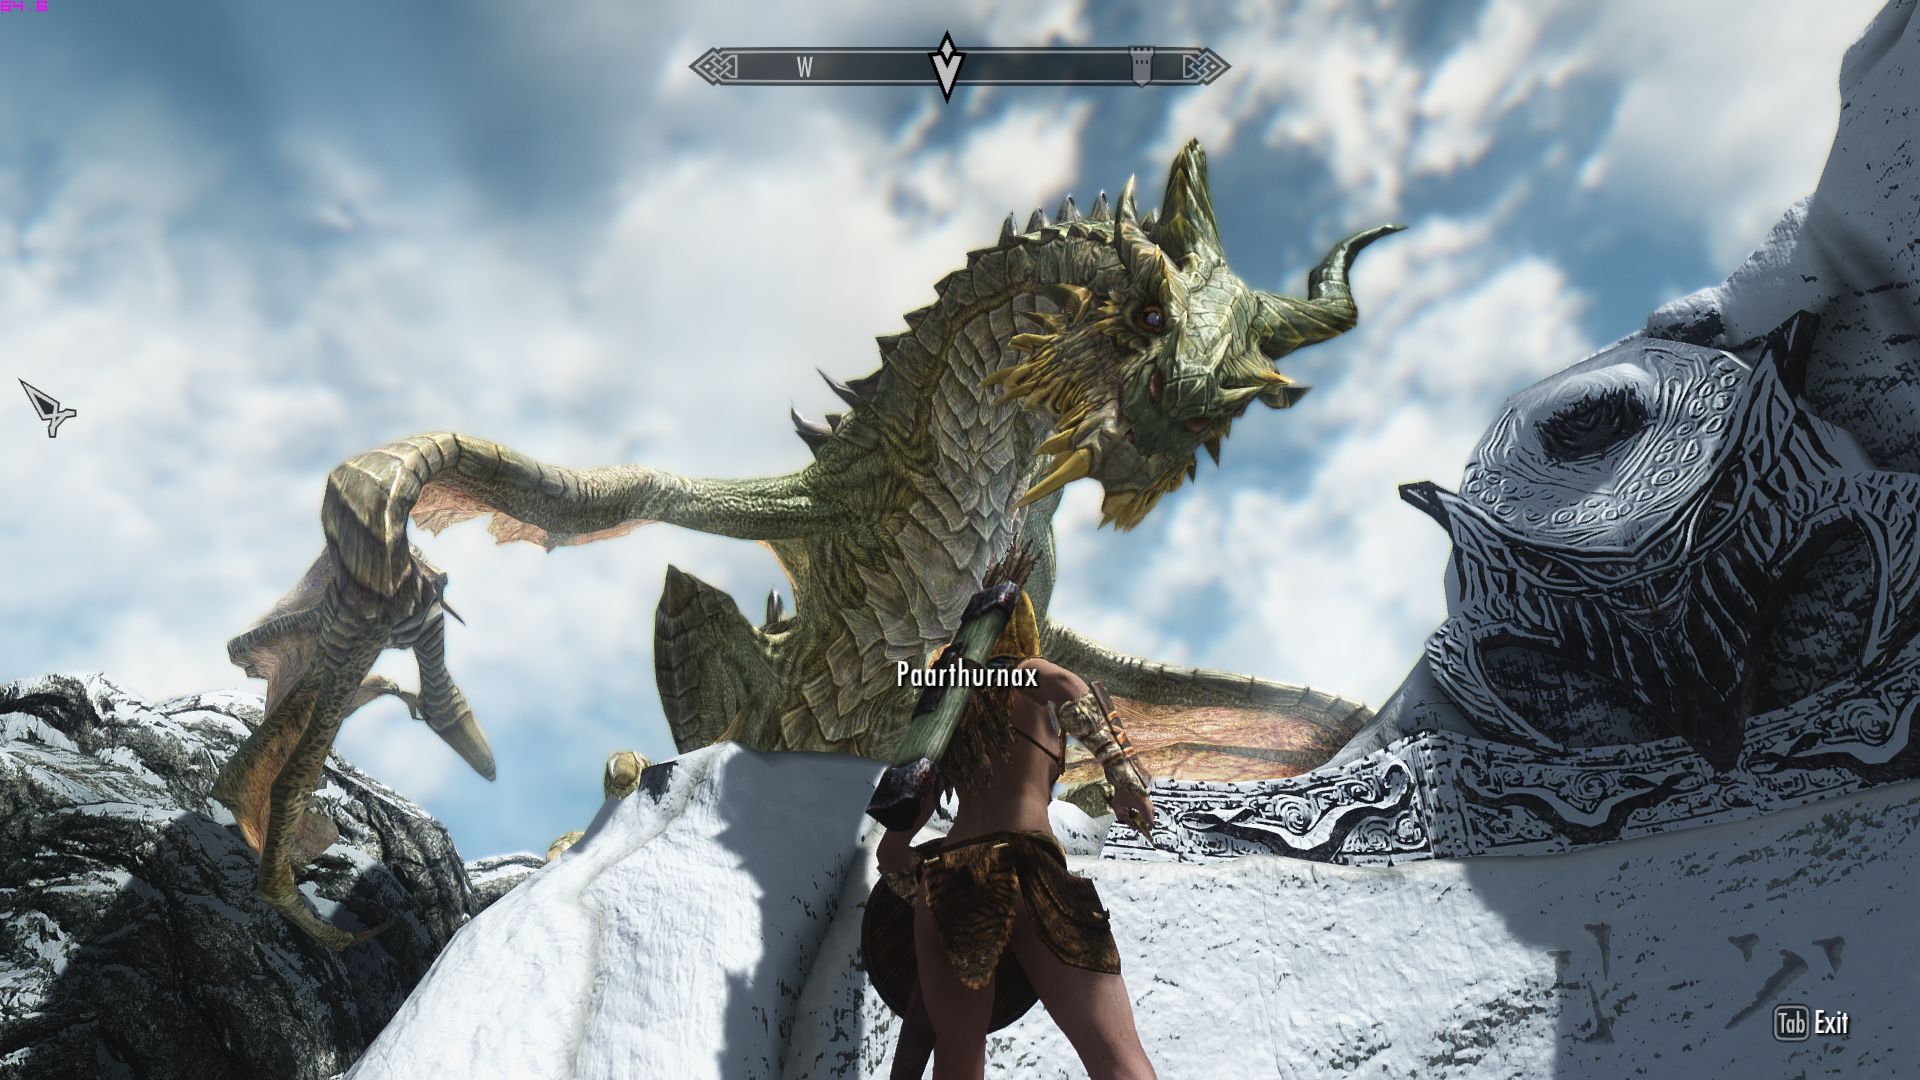 Here Are Some Skyrim Screenshots At Full 1080p HD Resolution These